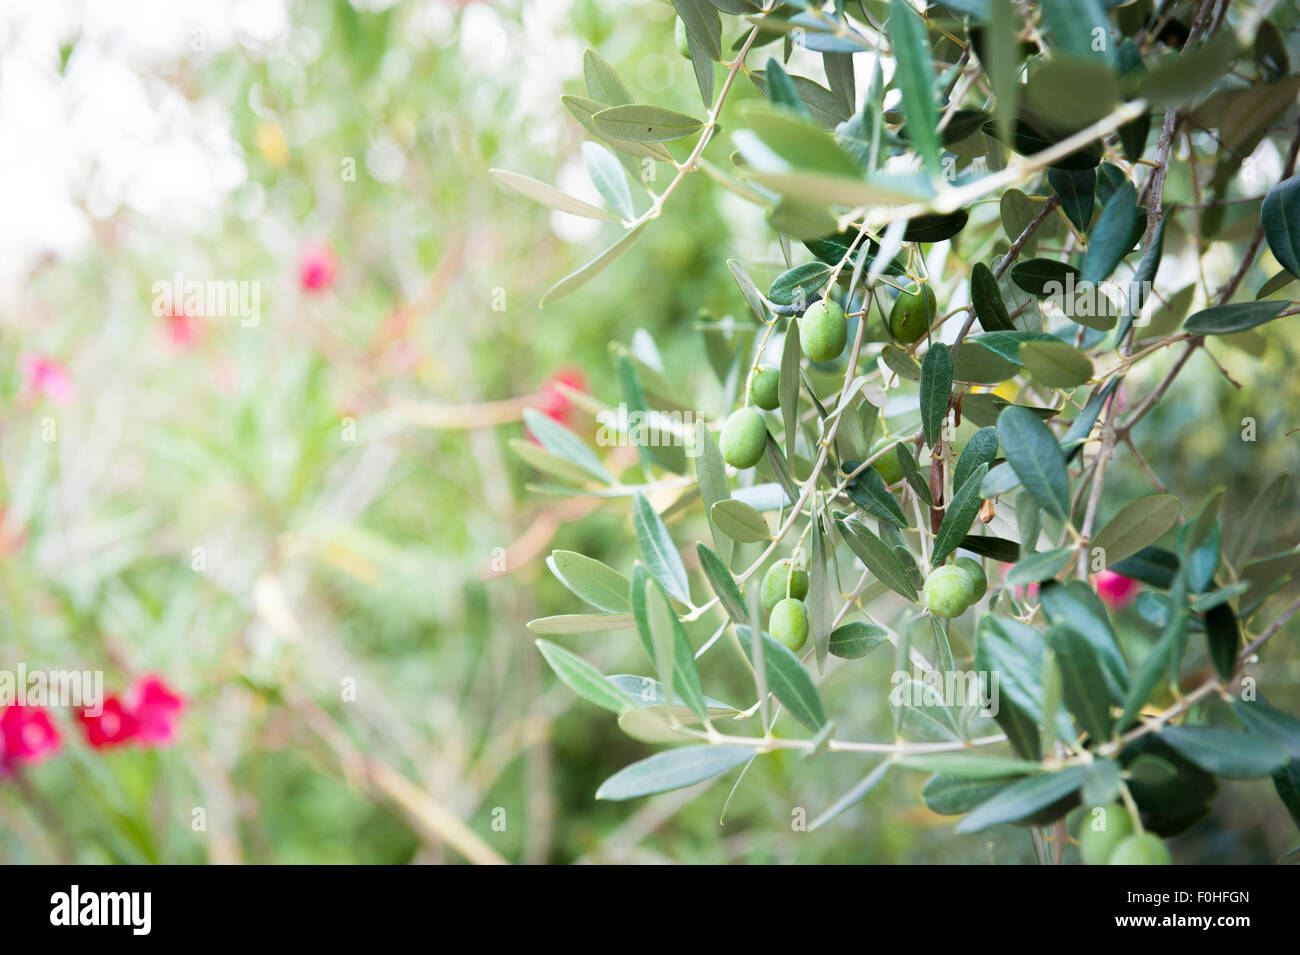 Olive tree branch detail with some green fruits and red flowers out of focus background Stock Photo